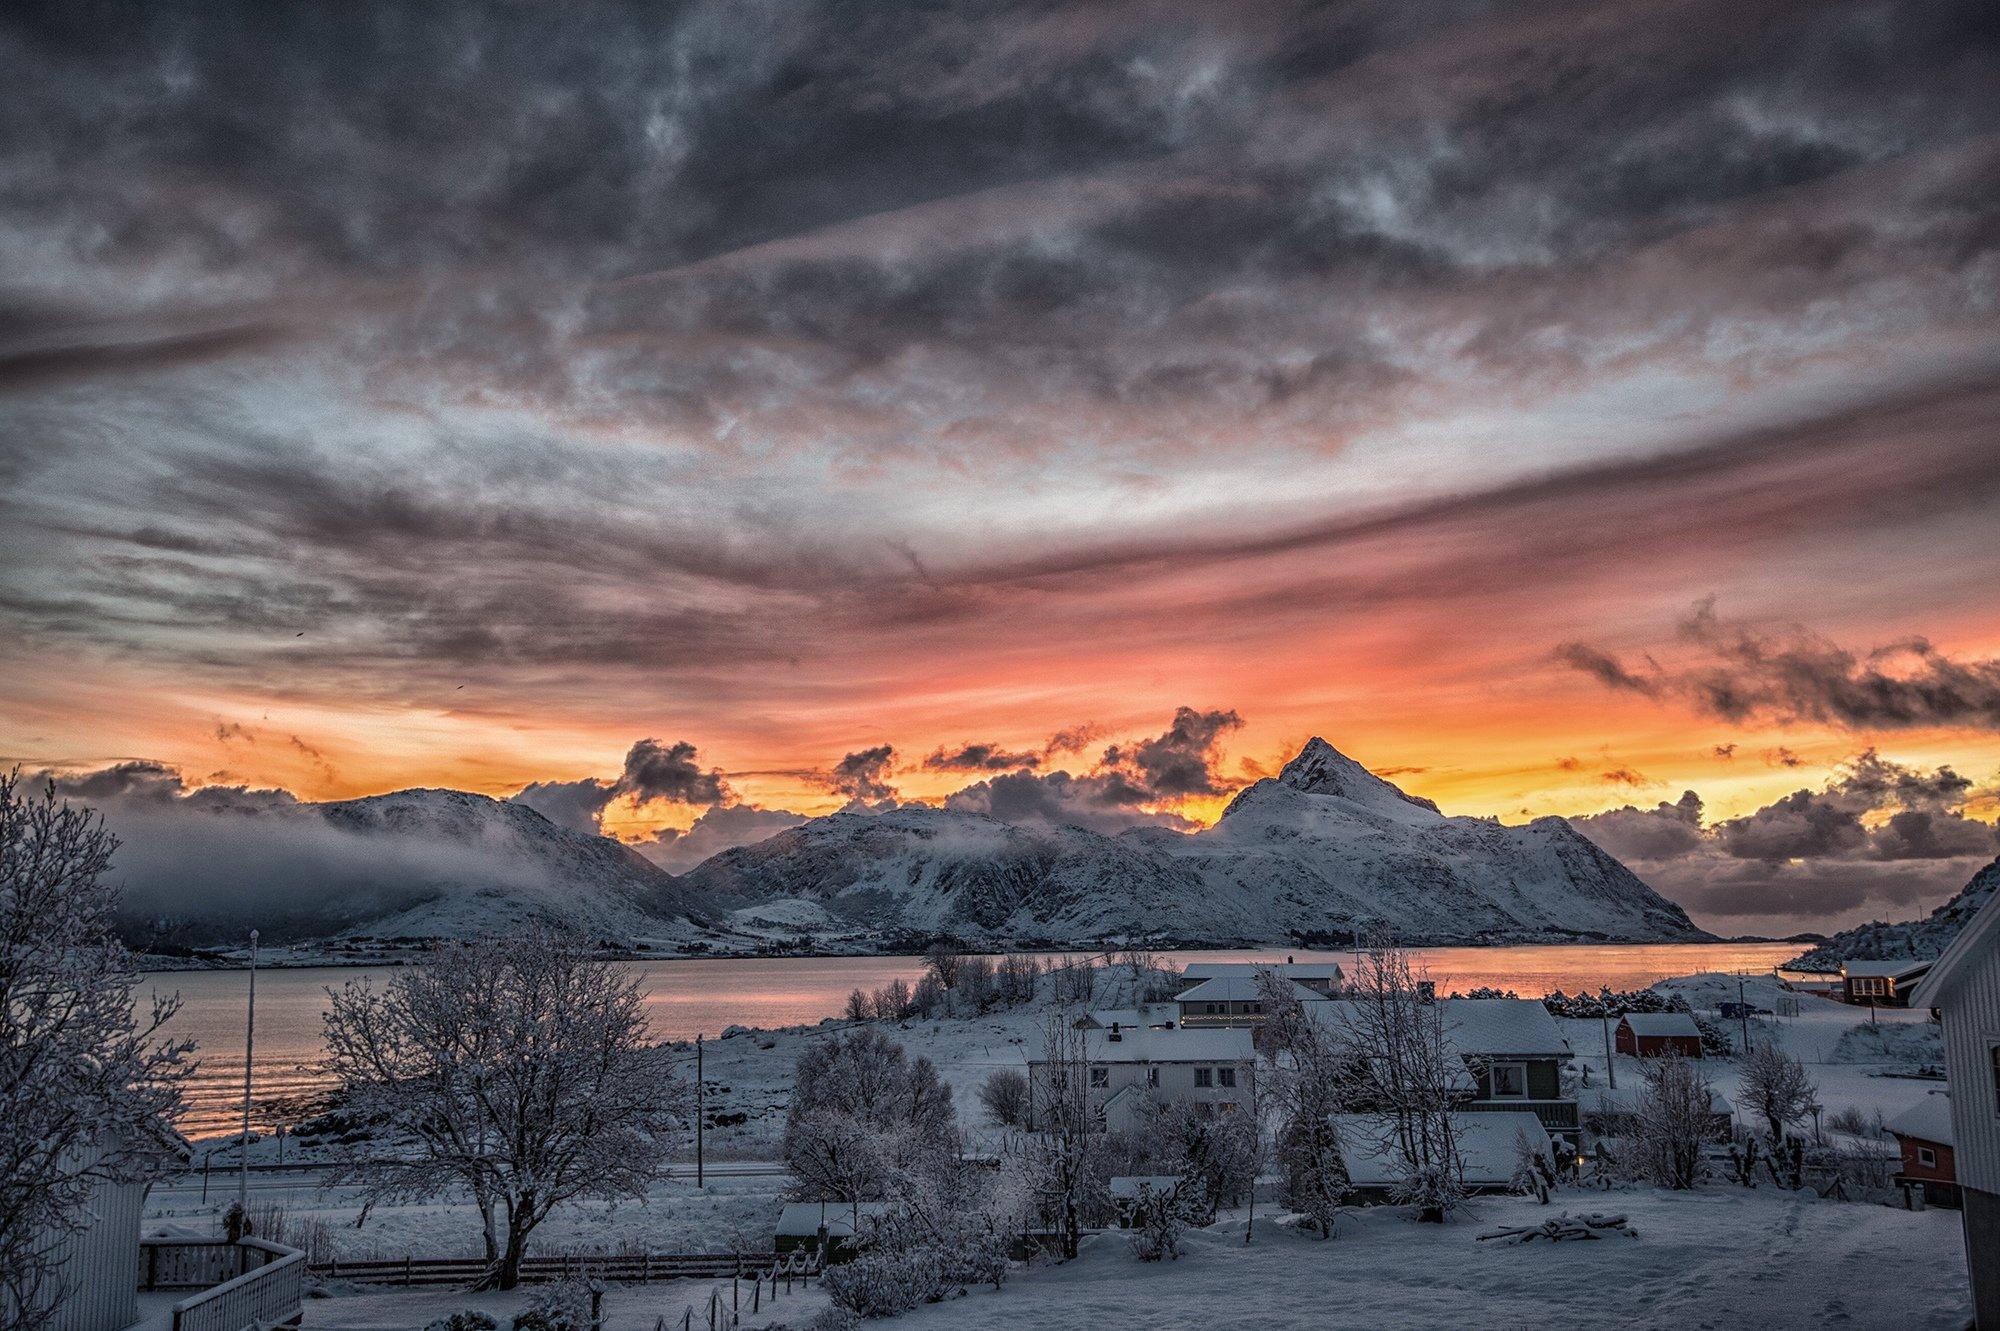 norway, Winter, Snow, A, Fishing, Village, Sunset, Town